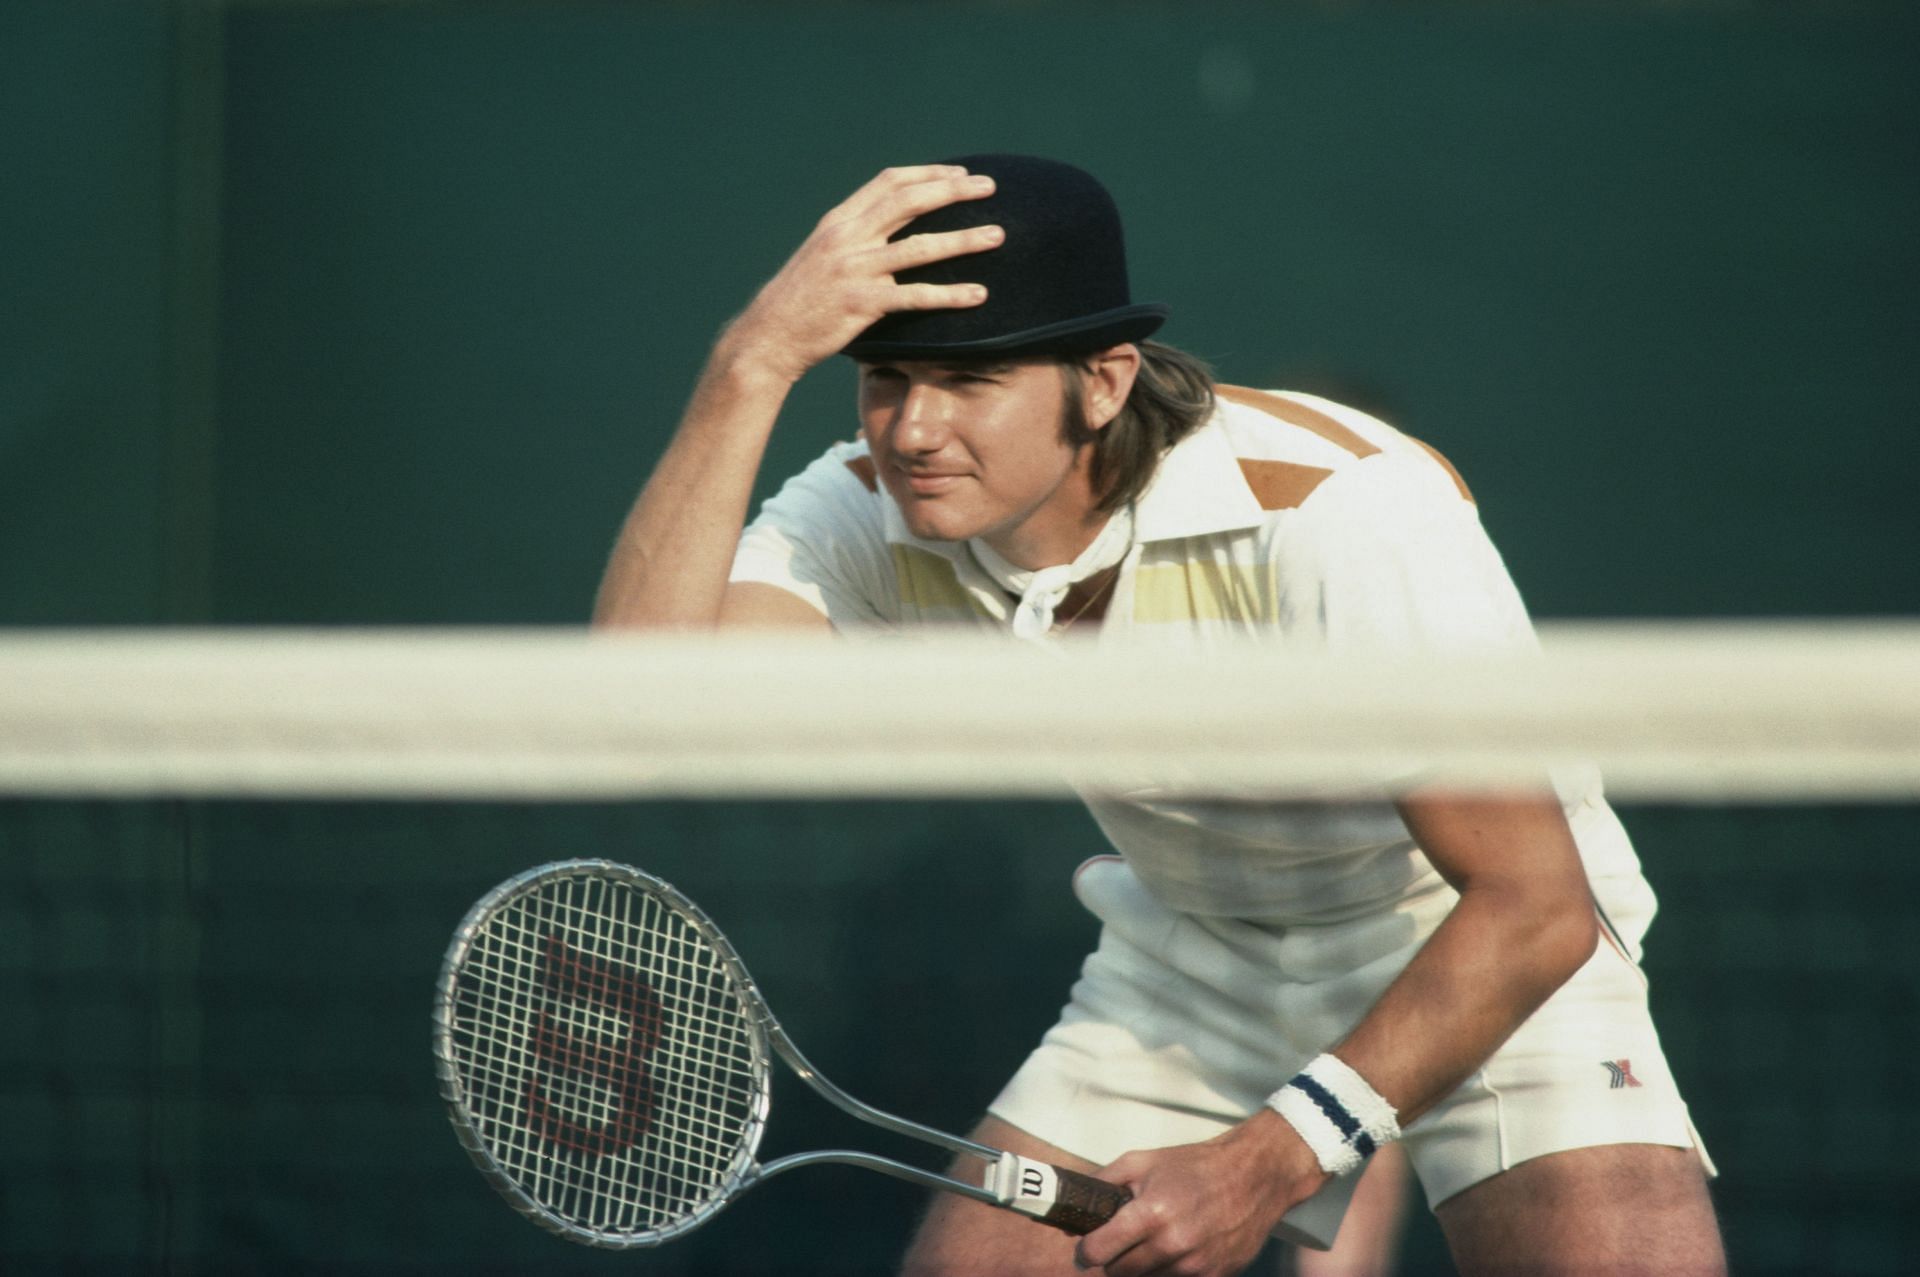 Jimmy Connors in action at Wimbledon 1976